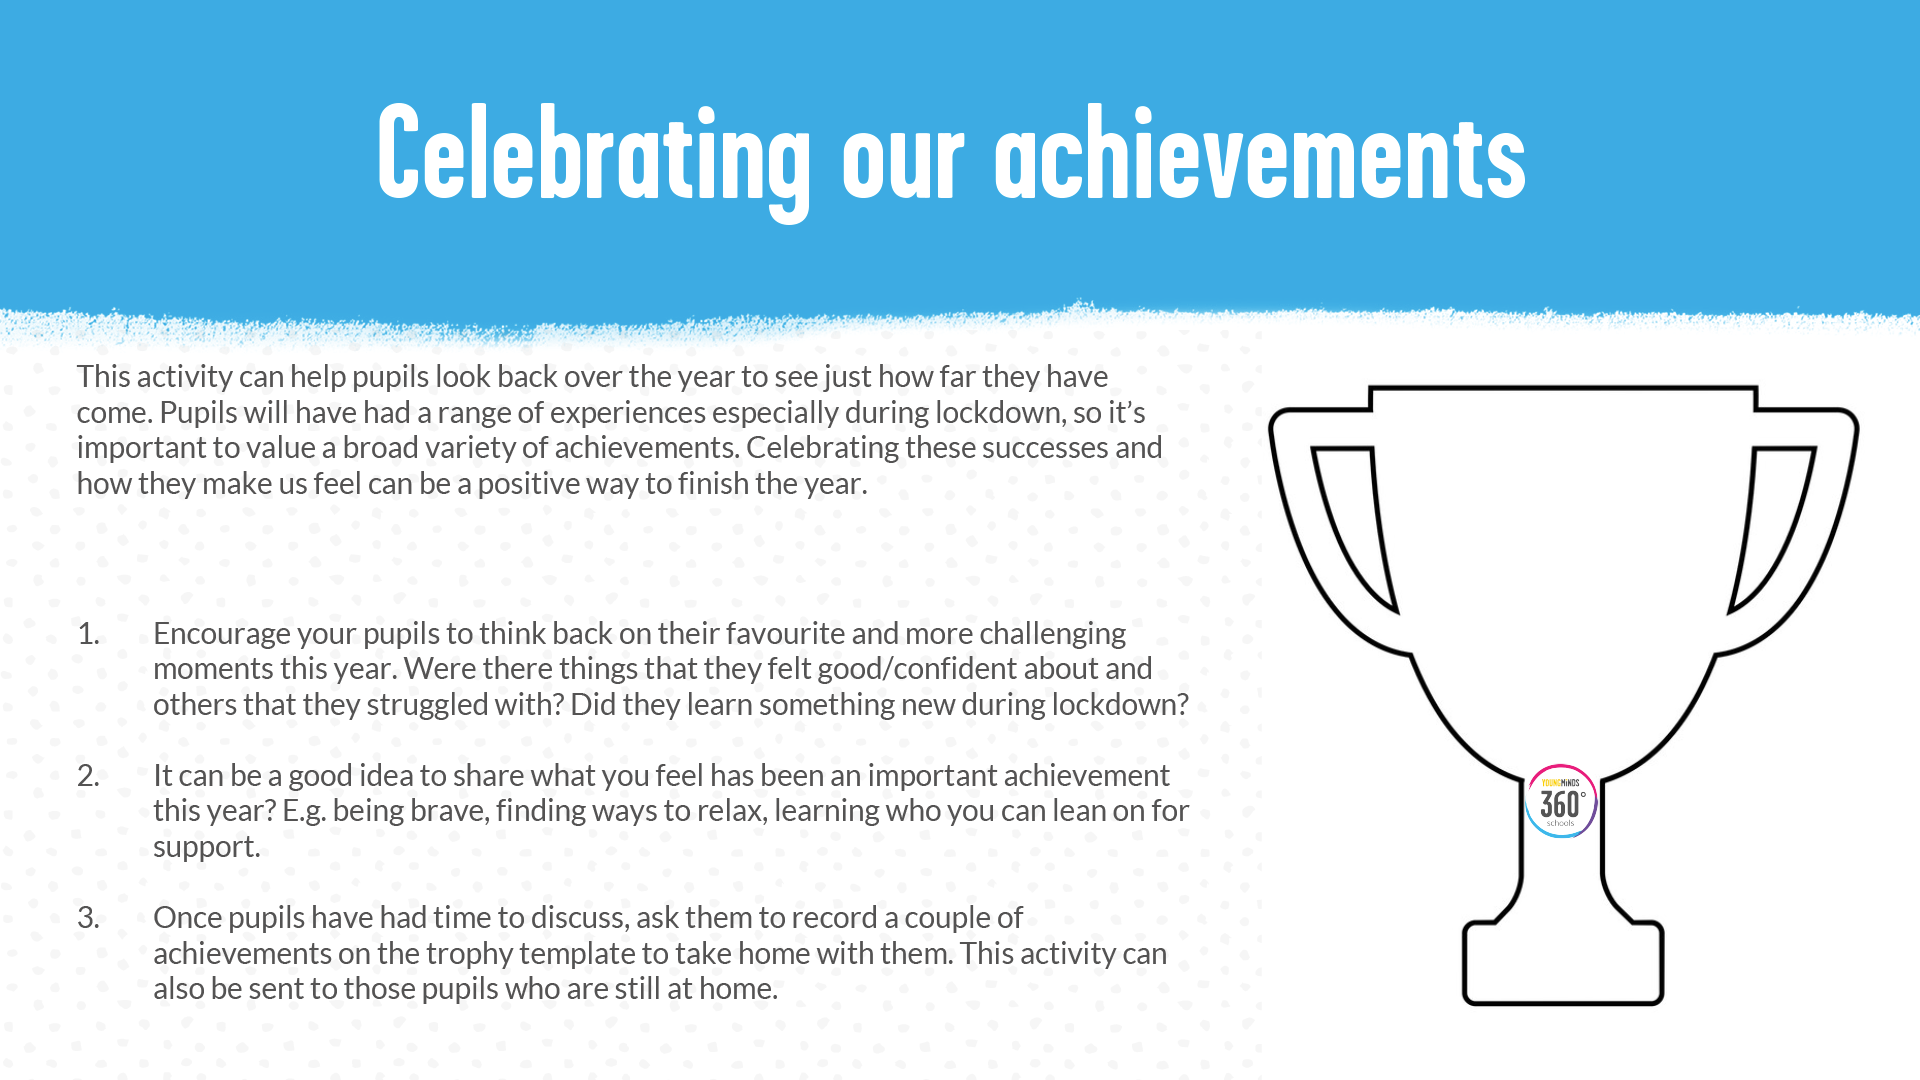 An image of our 'Celebrating our achievements' poster. On the right hand side of the poster is the outline of a trophy.